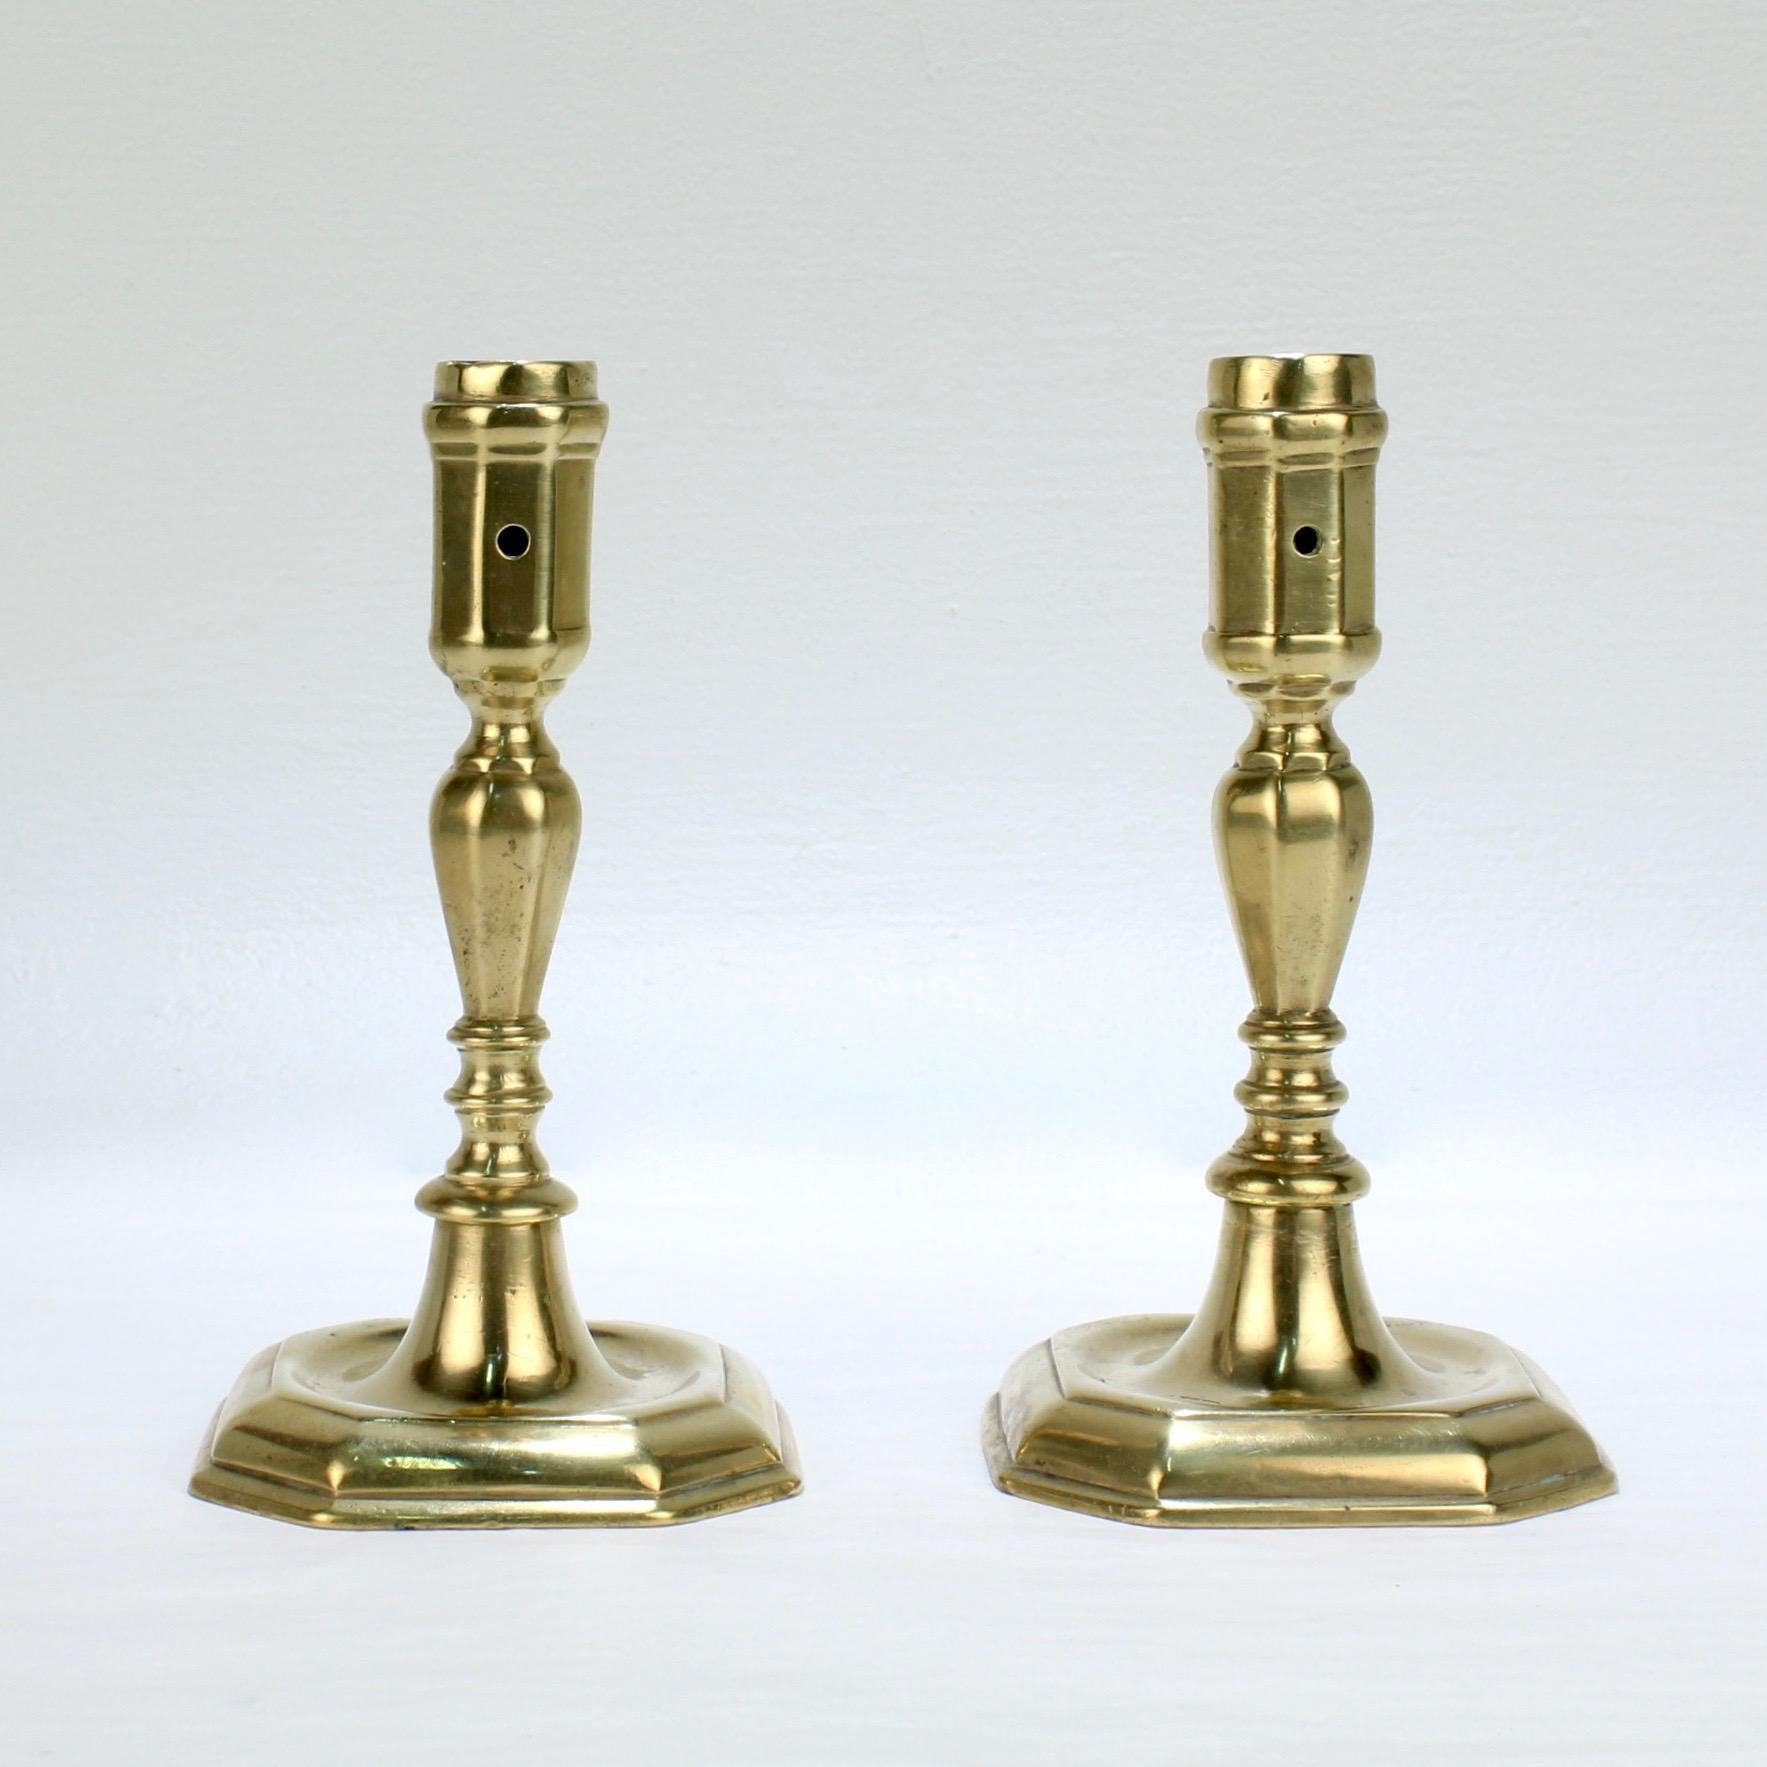 A very fine pair of 18th century brass candlesticks.

Each with an octagonal base supporting faceted stems and candle cups. (Each candle cup has a hole for wax removal.)

Simply an elegant period candleholders!

Measure: Height ca. 6 1/2 in.

Items